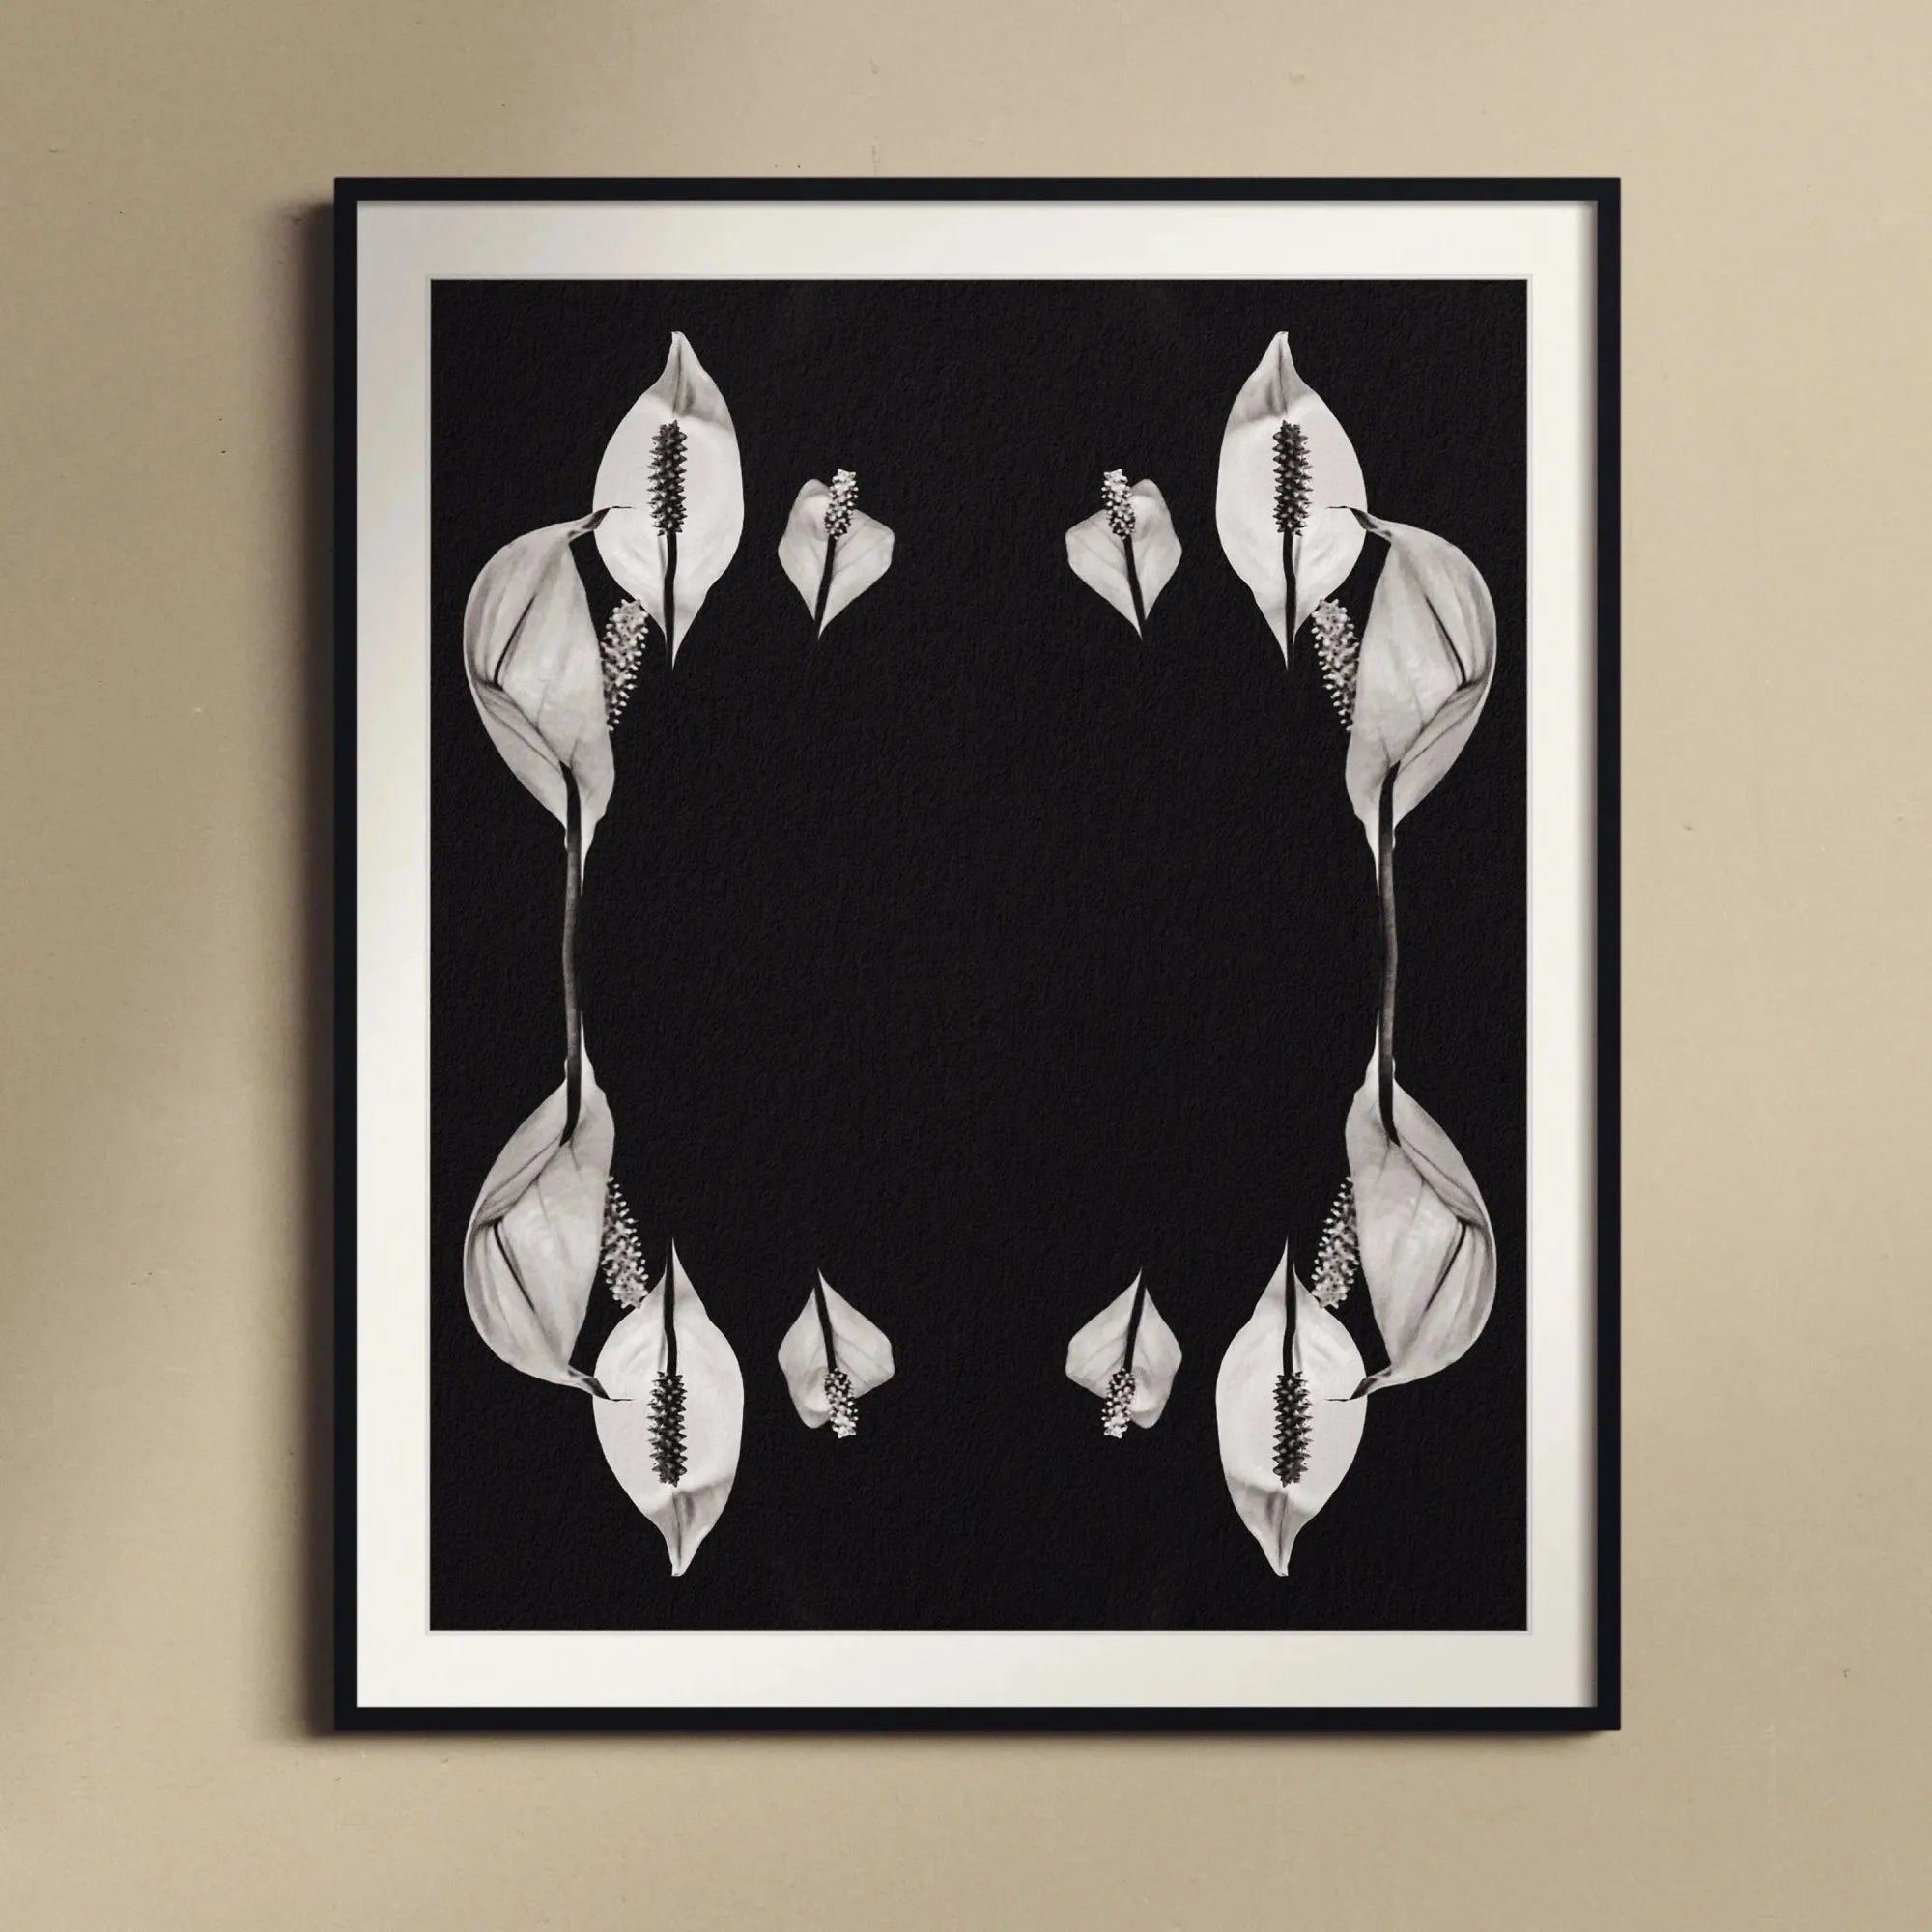 Pearly Whites Framed & Mounted Print - Posters Prints & Visual Artwork - Aesthetic Art